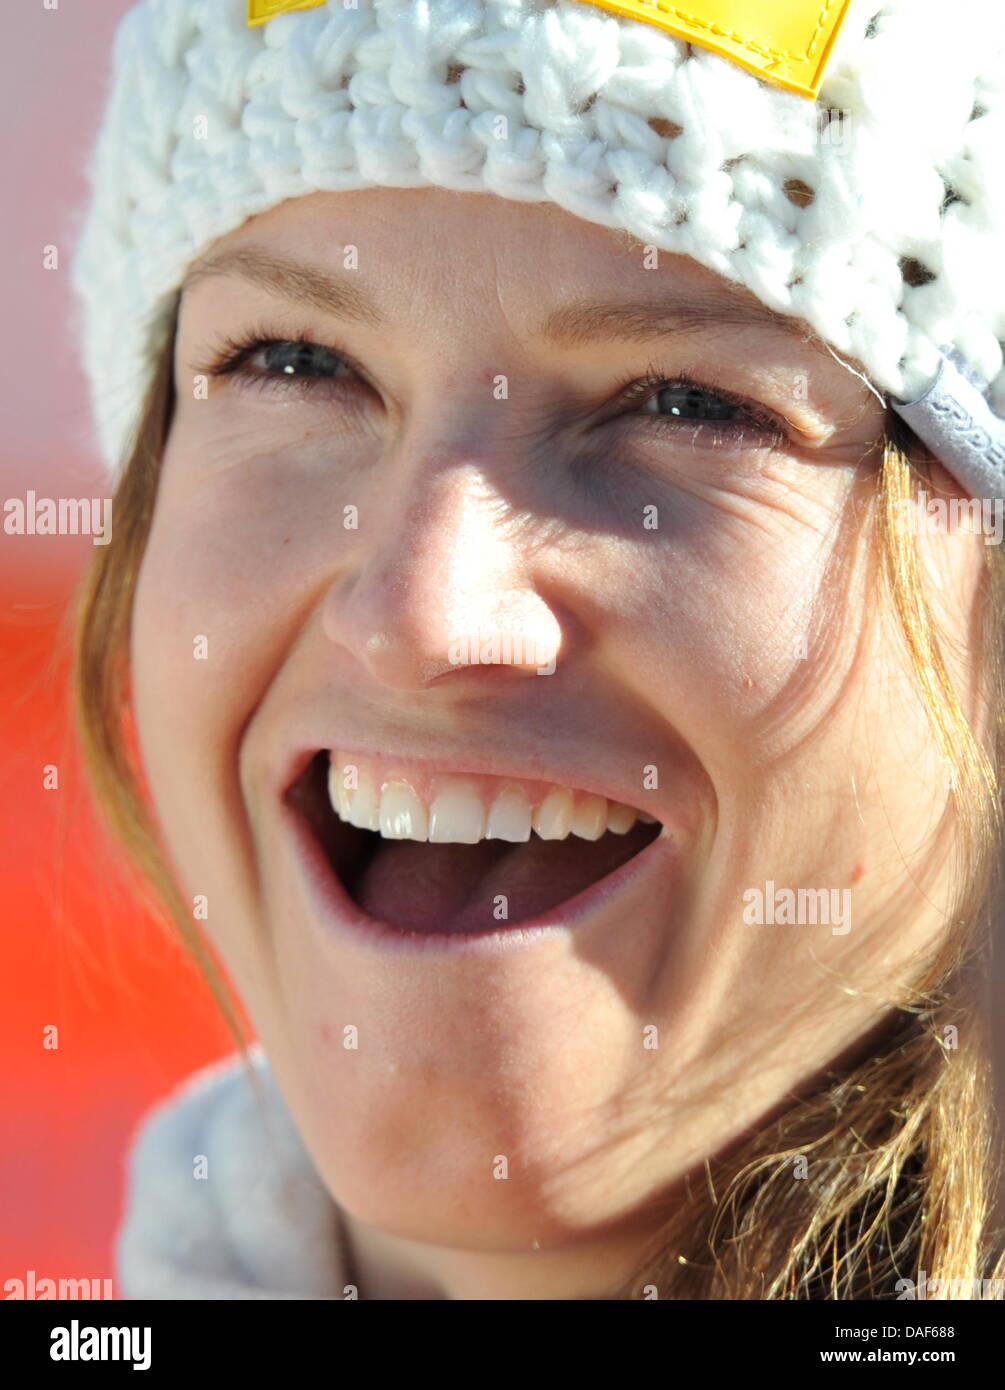 Julia Mancuso of the USA reacts in the finish area of the women's Downhill Training at the Skiing World Championships in Garmisch-Partenkirchen, Germany, 10 February 2011. Photo: Peter Kneffel Stock Photo